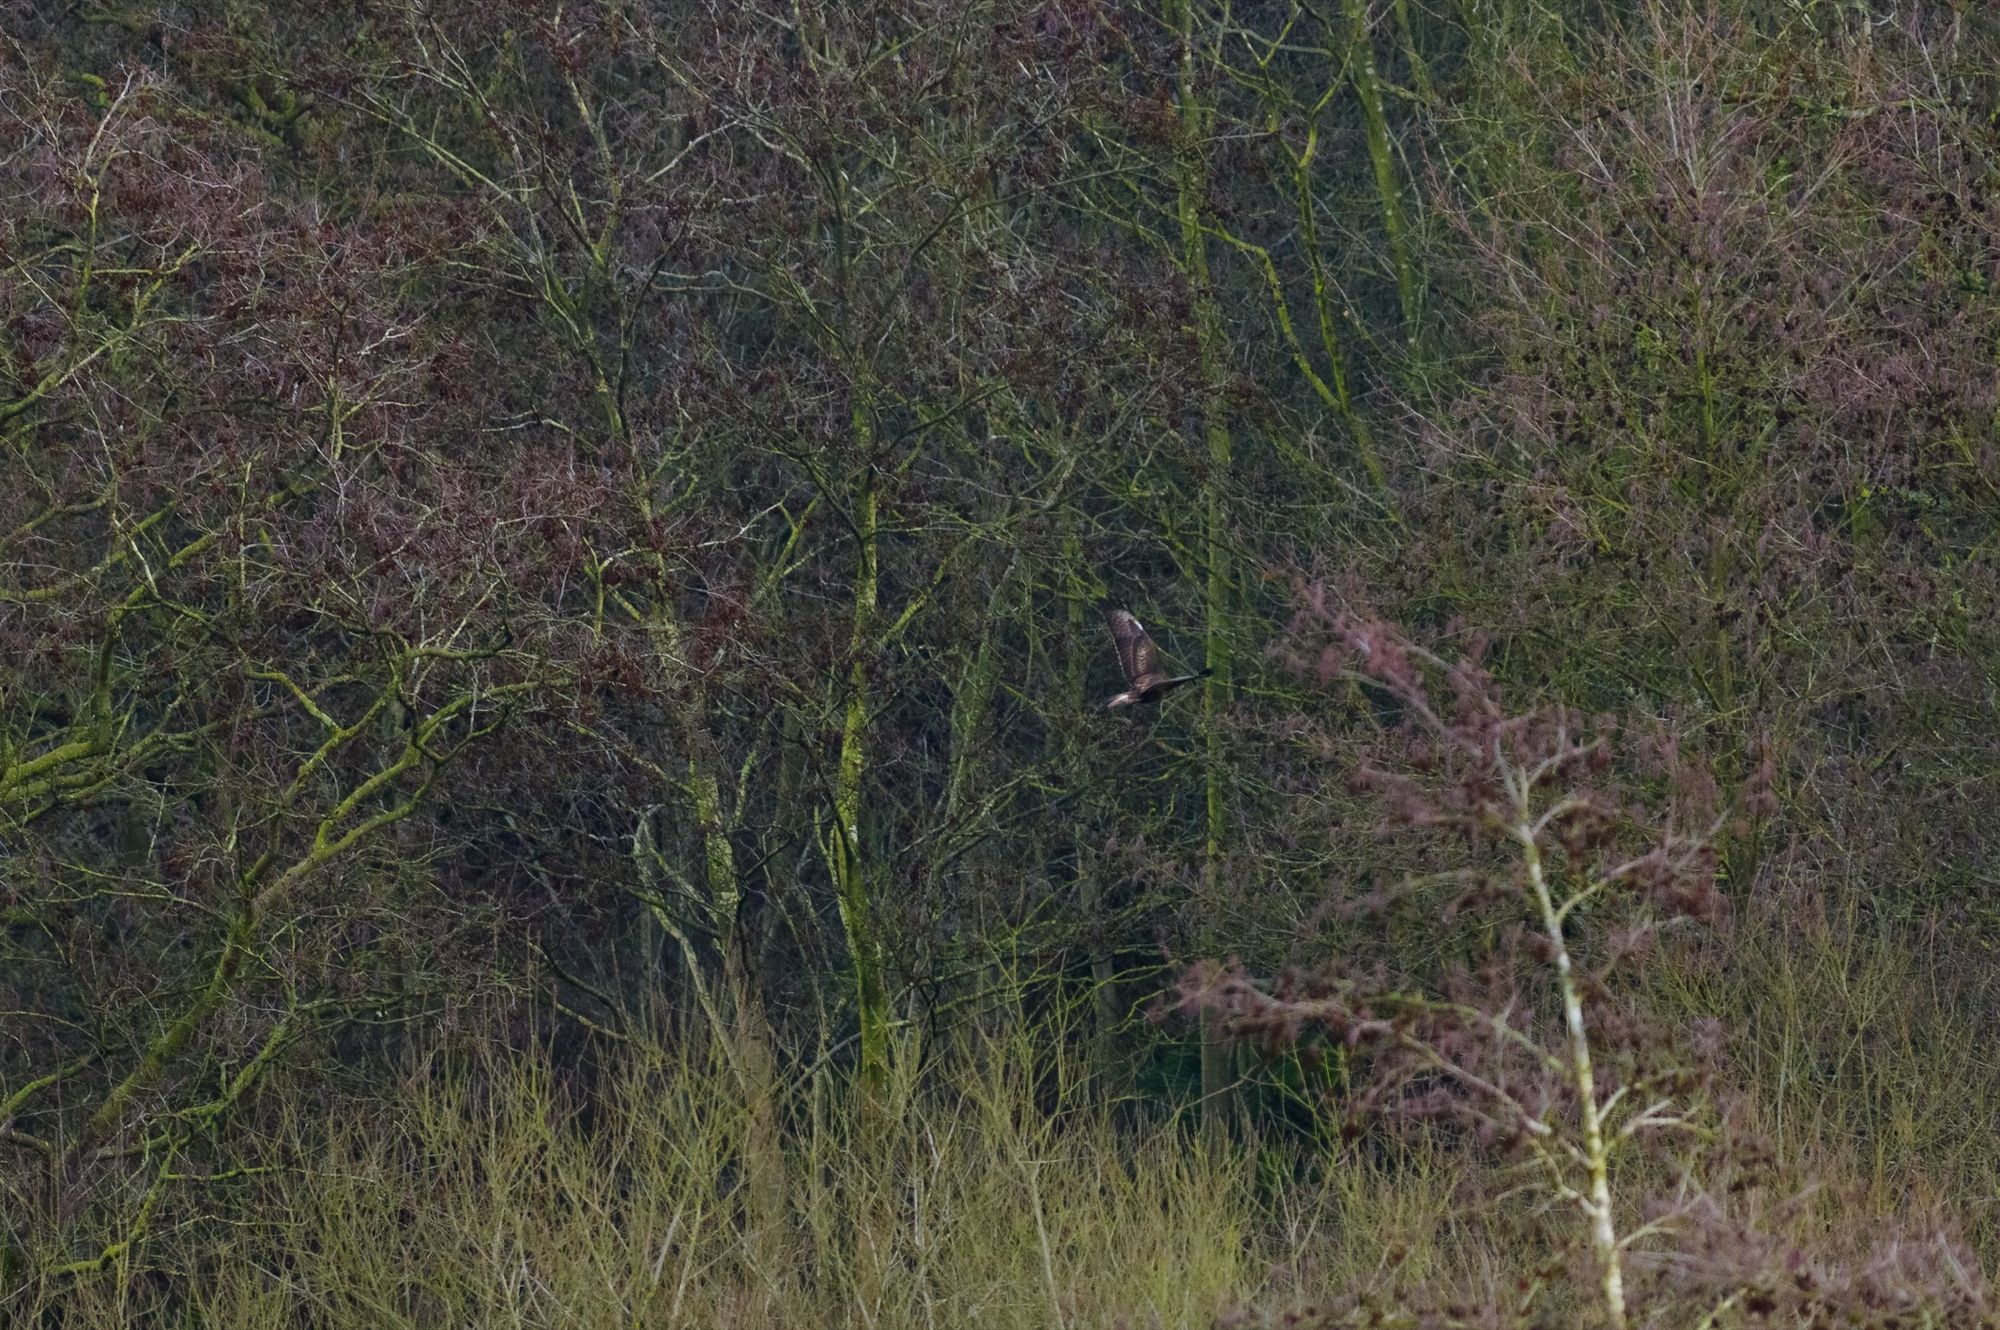 The buzzard disappears into the trees © Alex Roddie